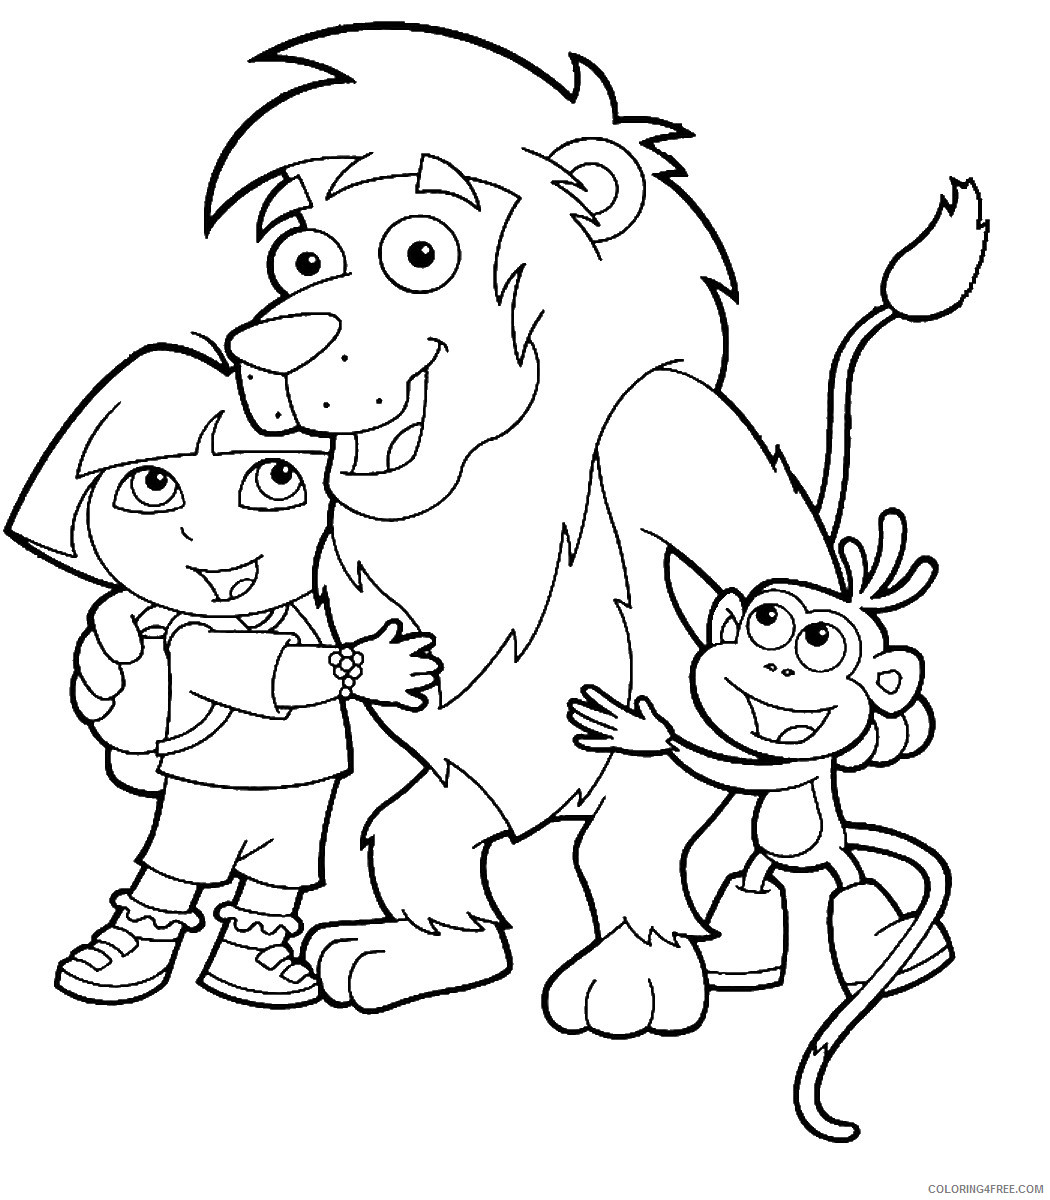 Dora the Explorer Coloring Pages Cartoons cl_dora48 Printable 2020 2632 Coloring4free